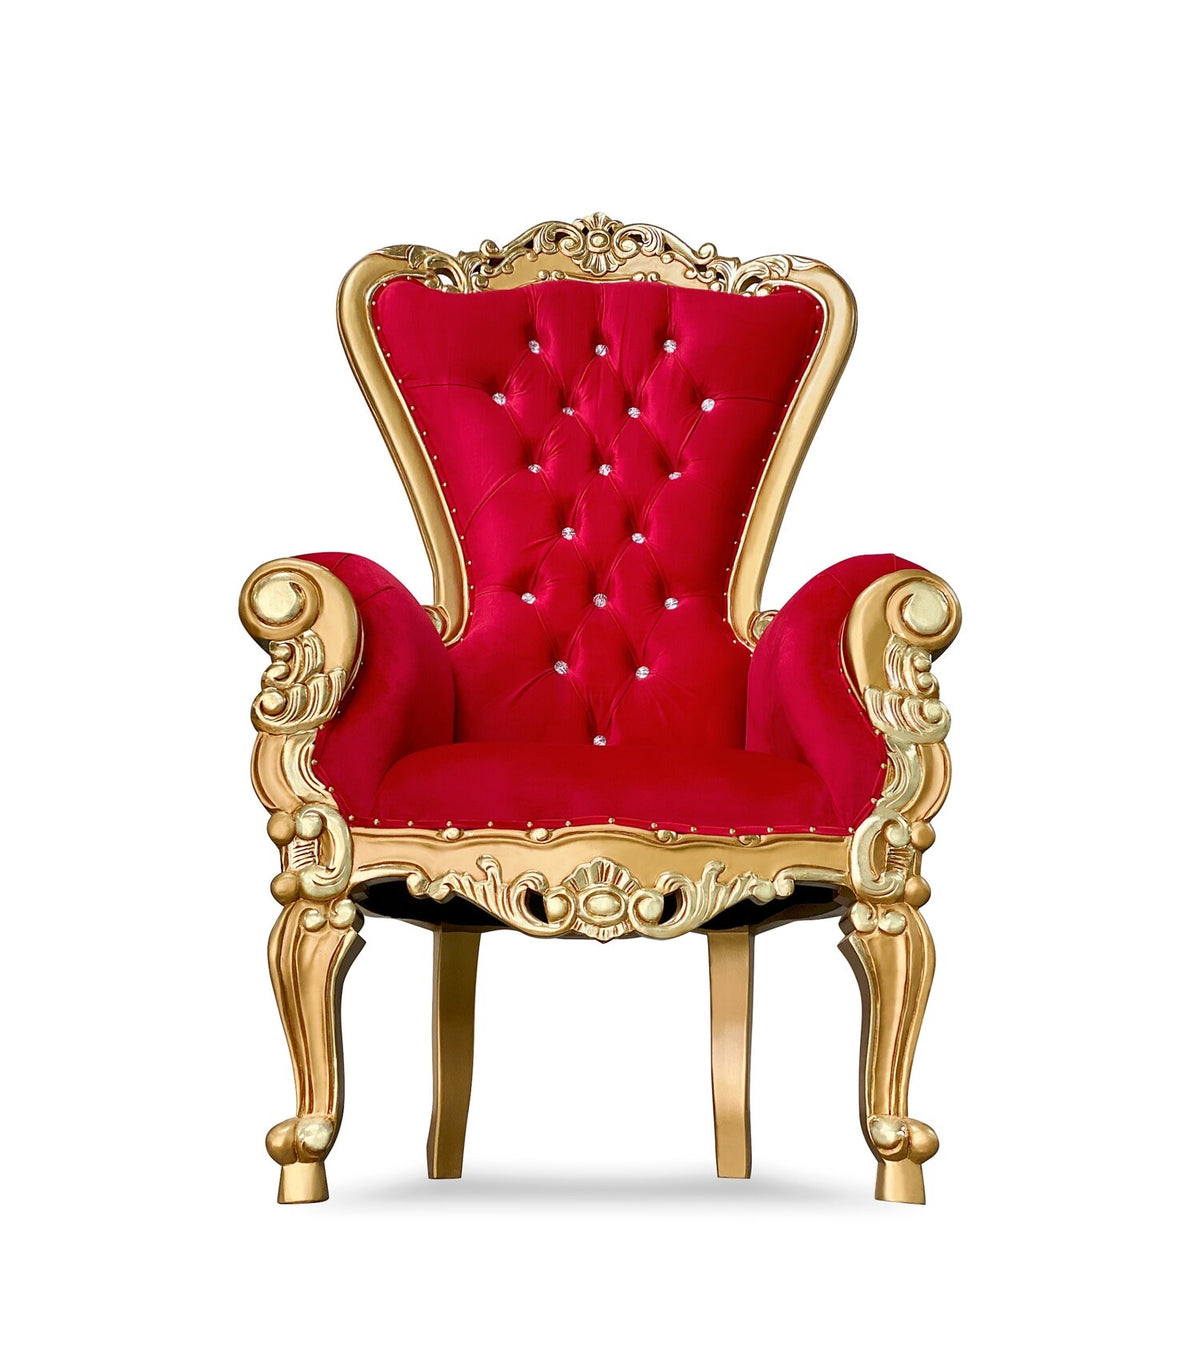 Adult Red/Gold Royal Throne Chair